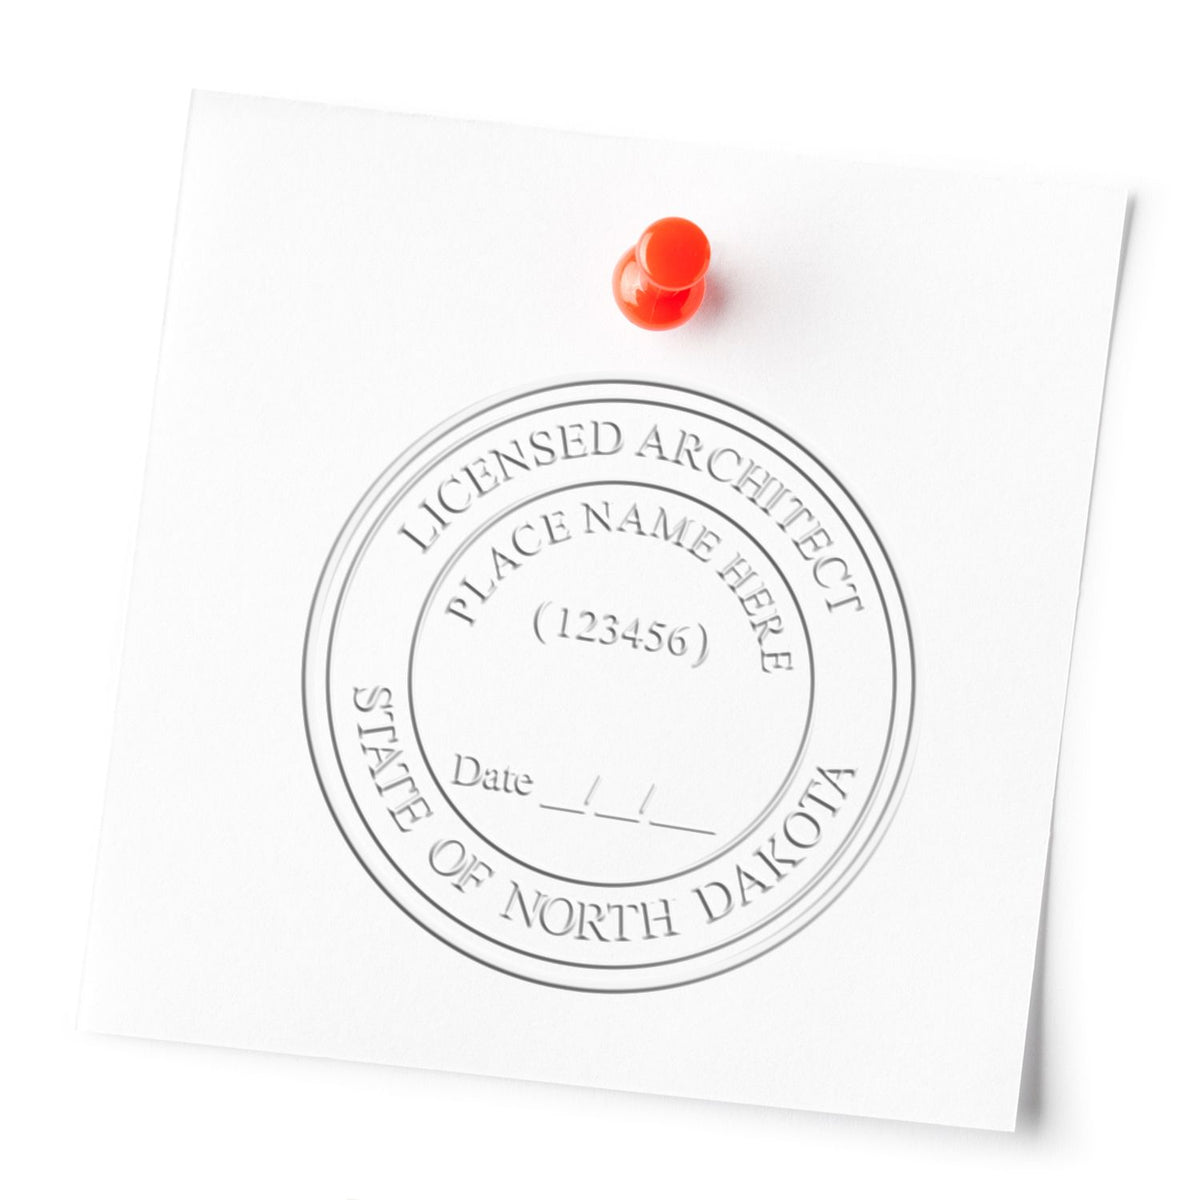 The North Dakota Desk Architect Embossing Seal stamp impression comes to life with a crisp, detailed photo on paper - showcasing true professional quality.